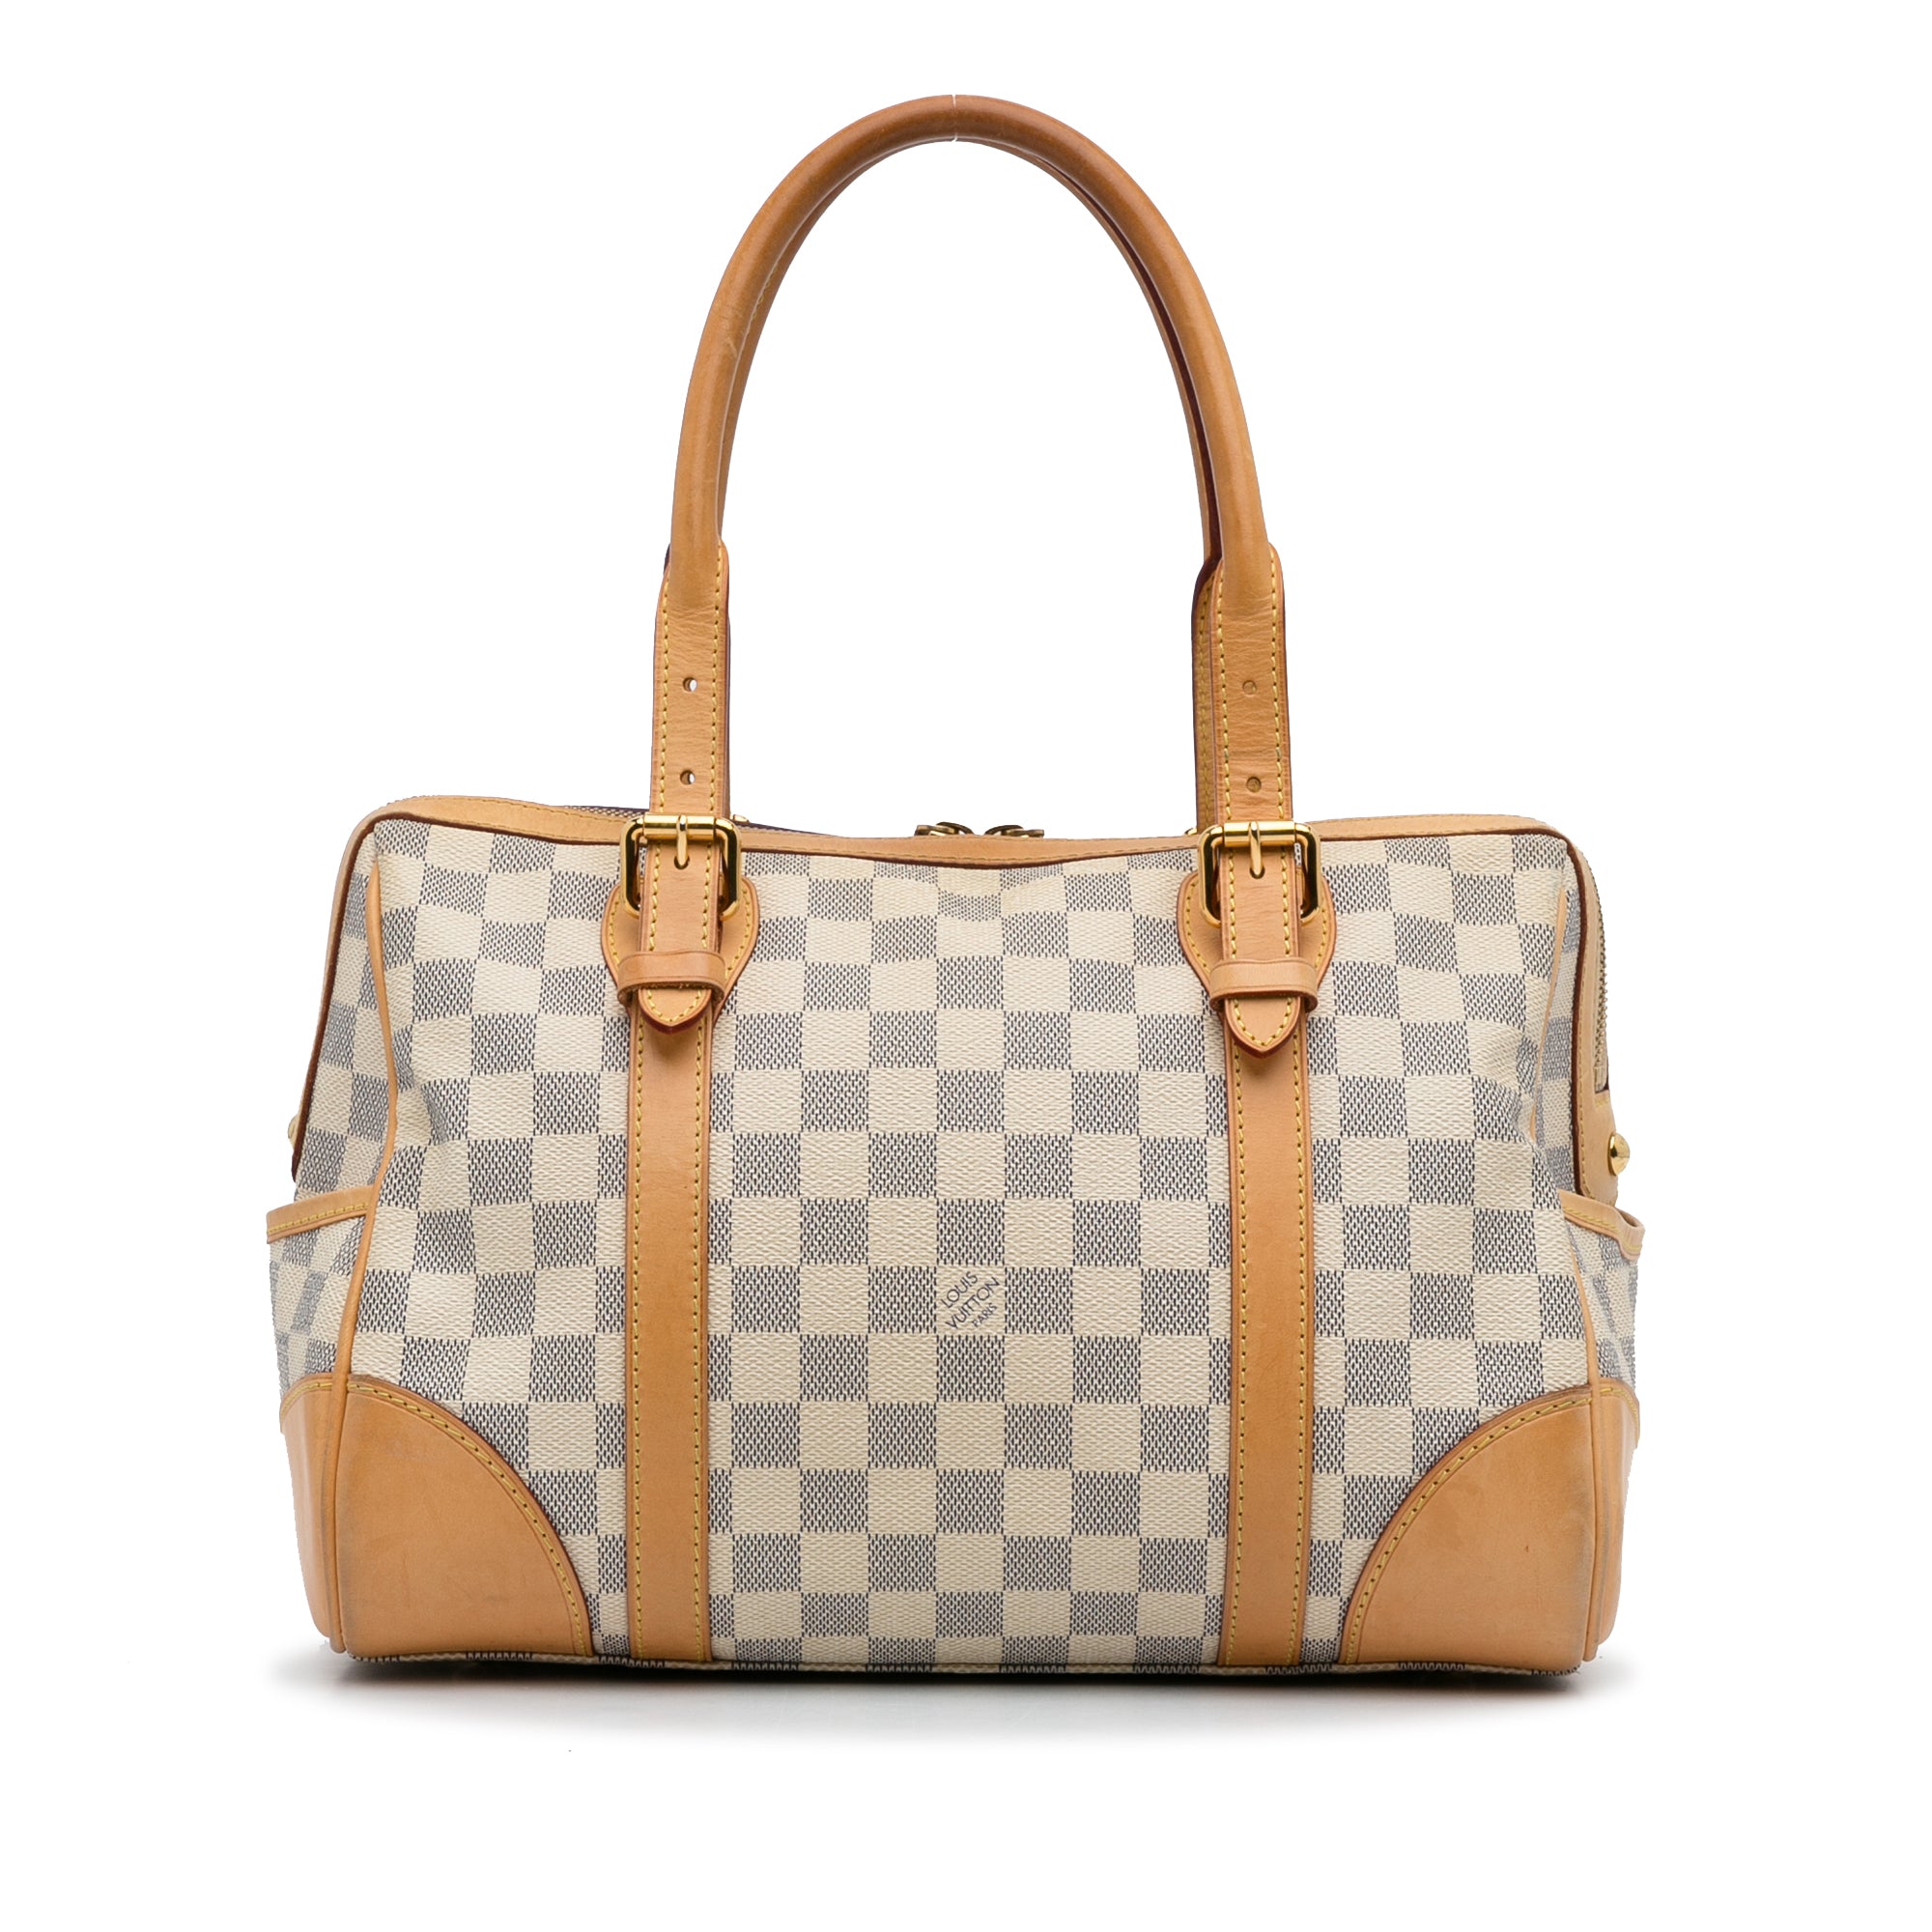 authentic louis vuitton berkeley damier handbag used only 2 time.